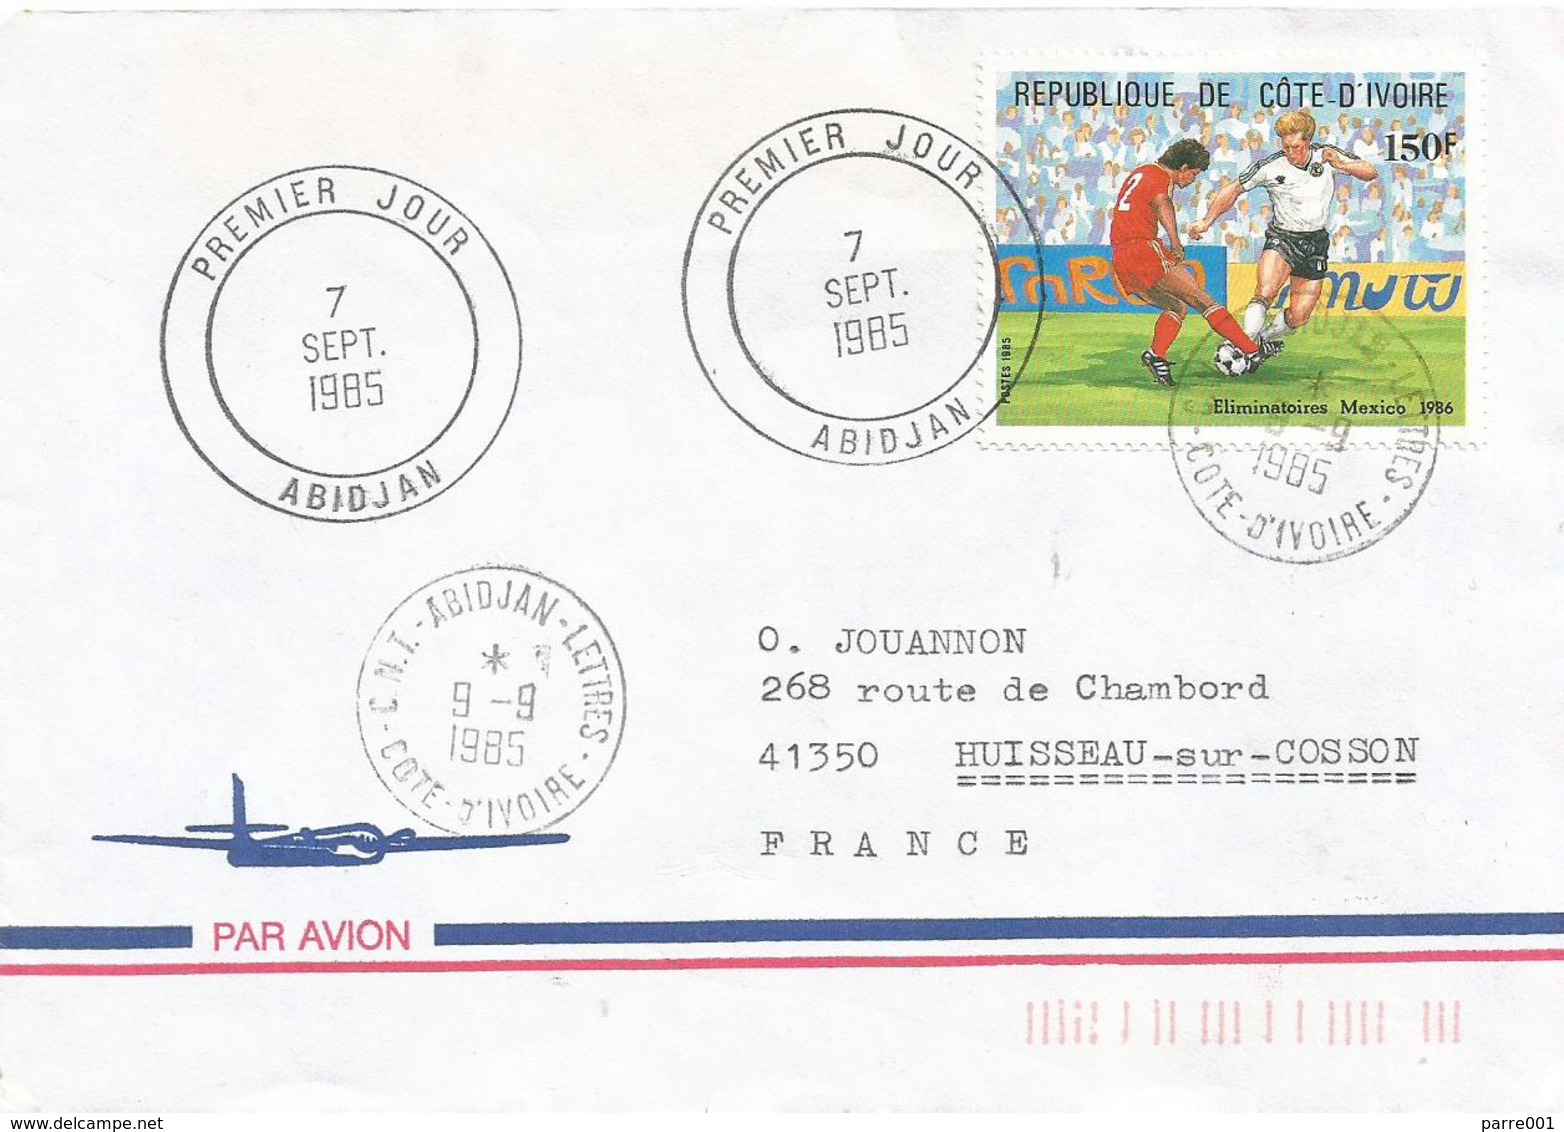 Cote D'Ivoire 1985 Abidjan World Cup Football Mexico German Team FDC Cover - 1986 – Mexico